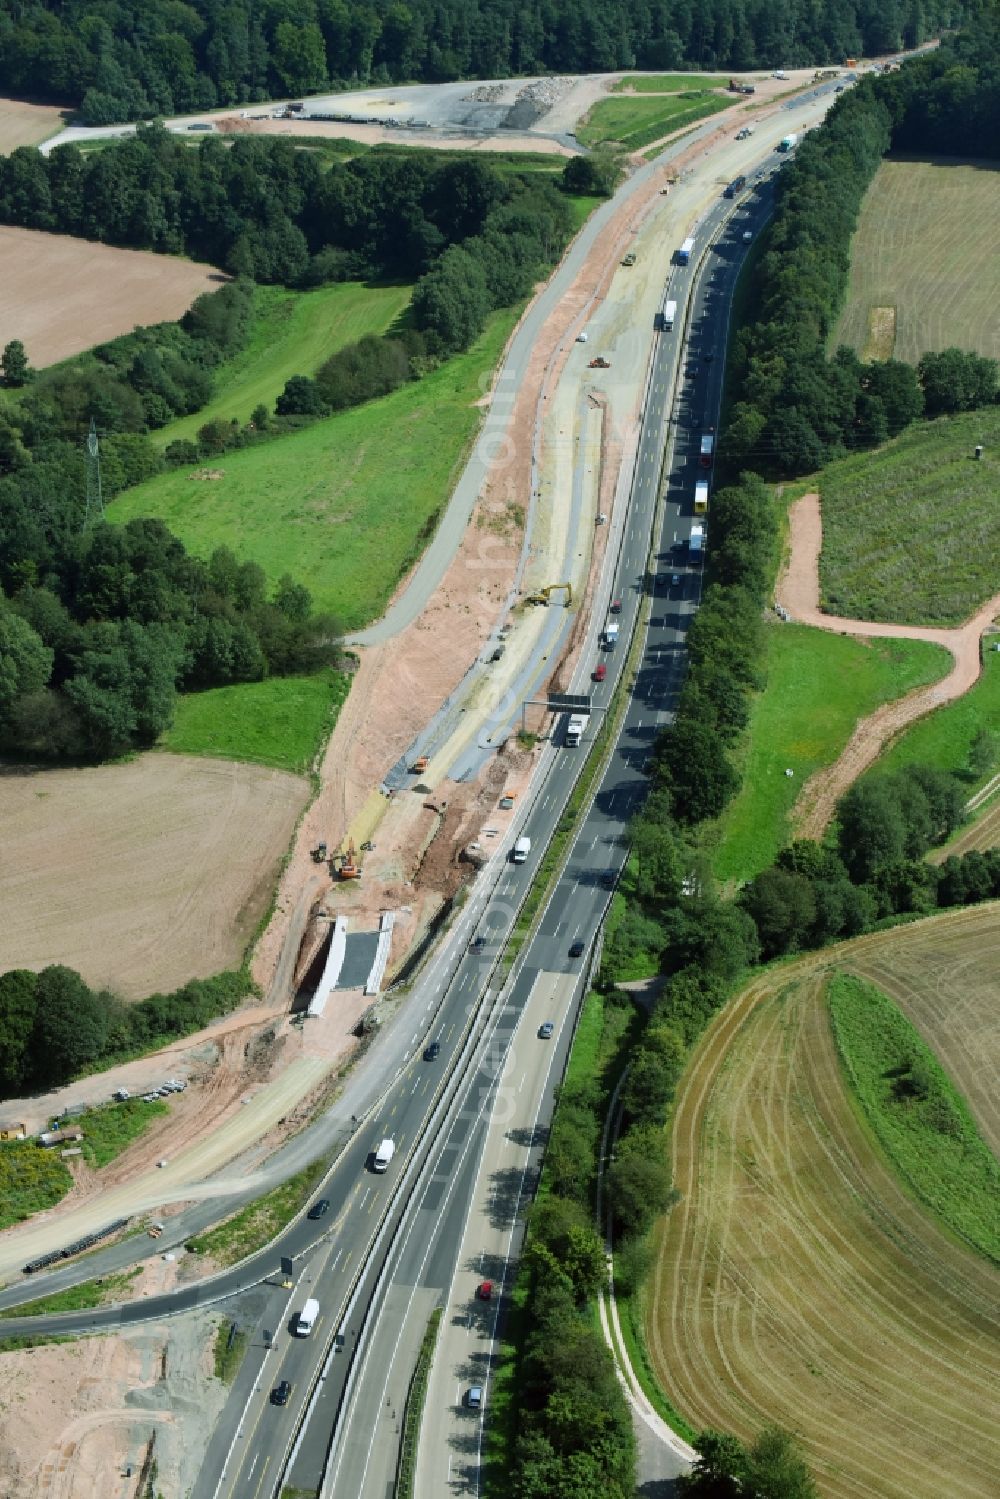 Aerial image Kirchheim - Construction site of the highway triangle the federal motorway A4 and A7 in Kirchheim in the state Hesse, Germany